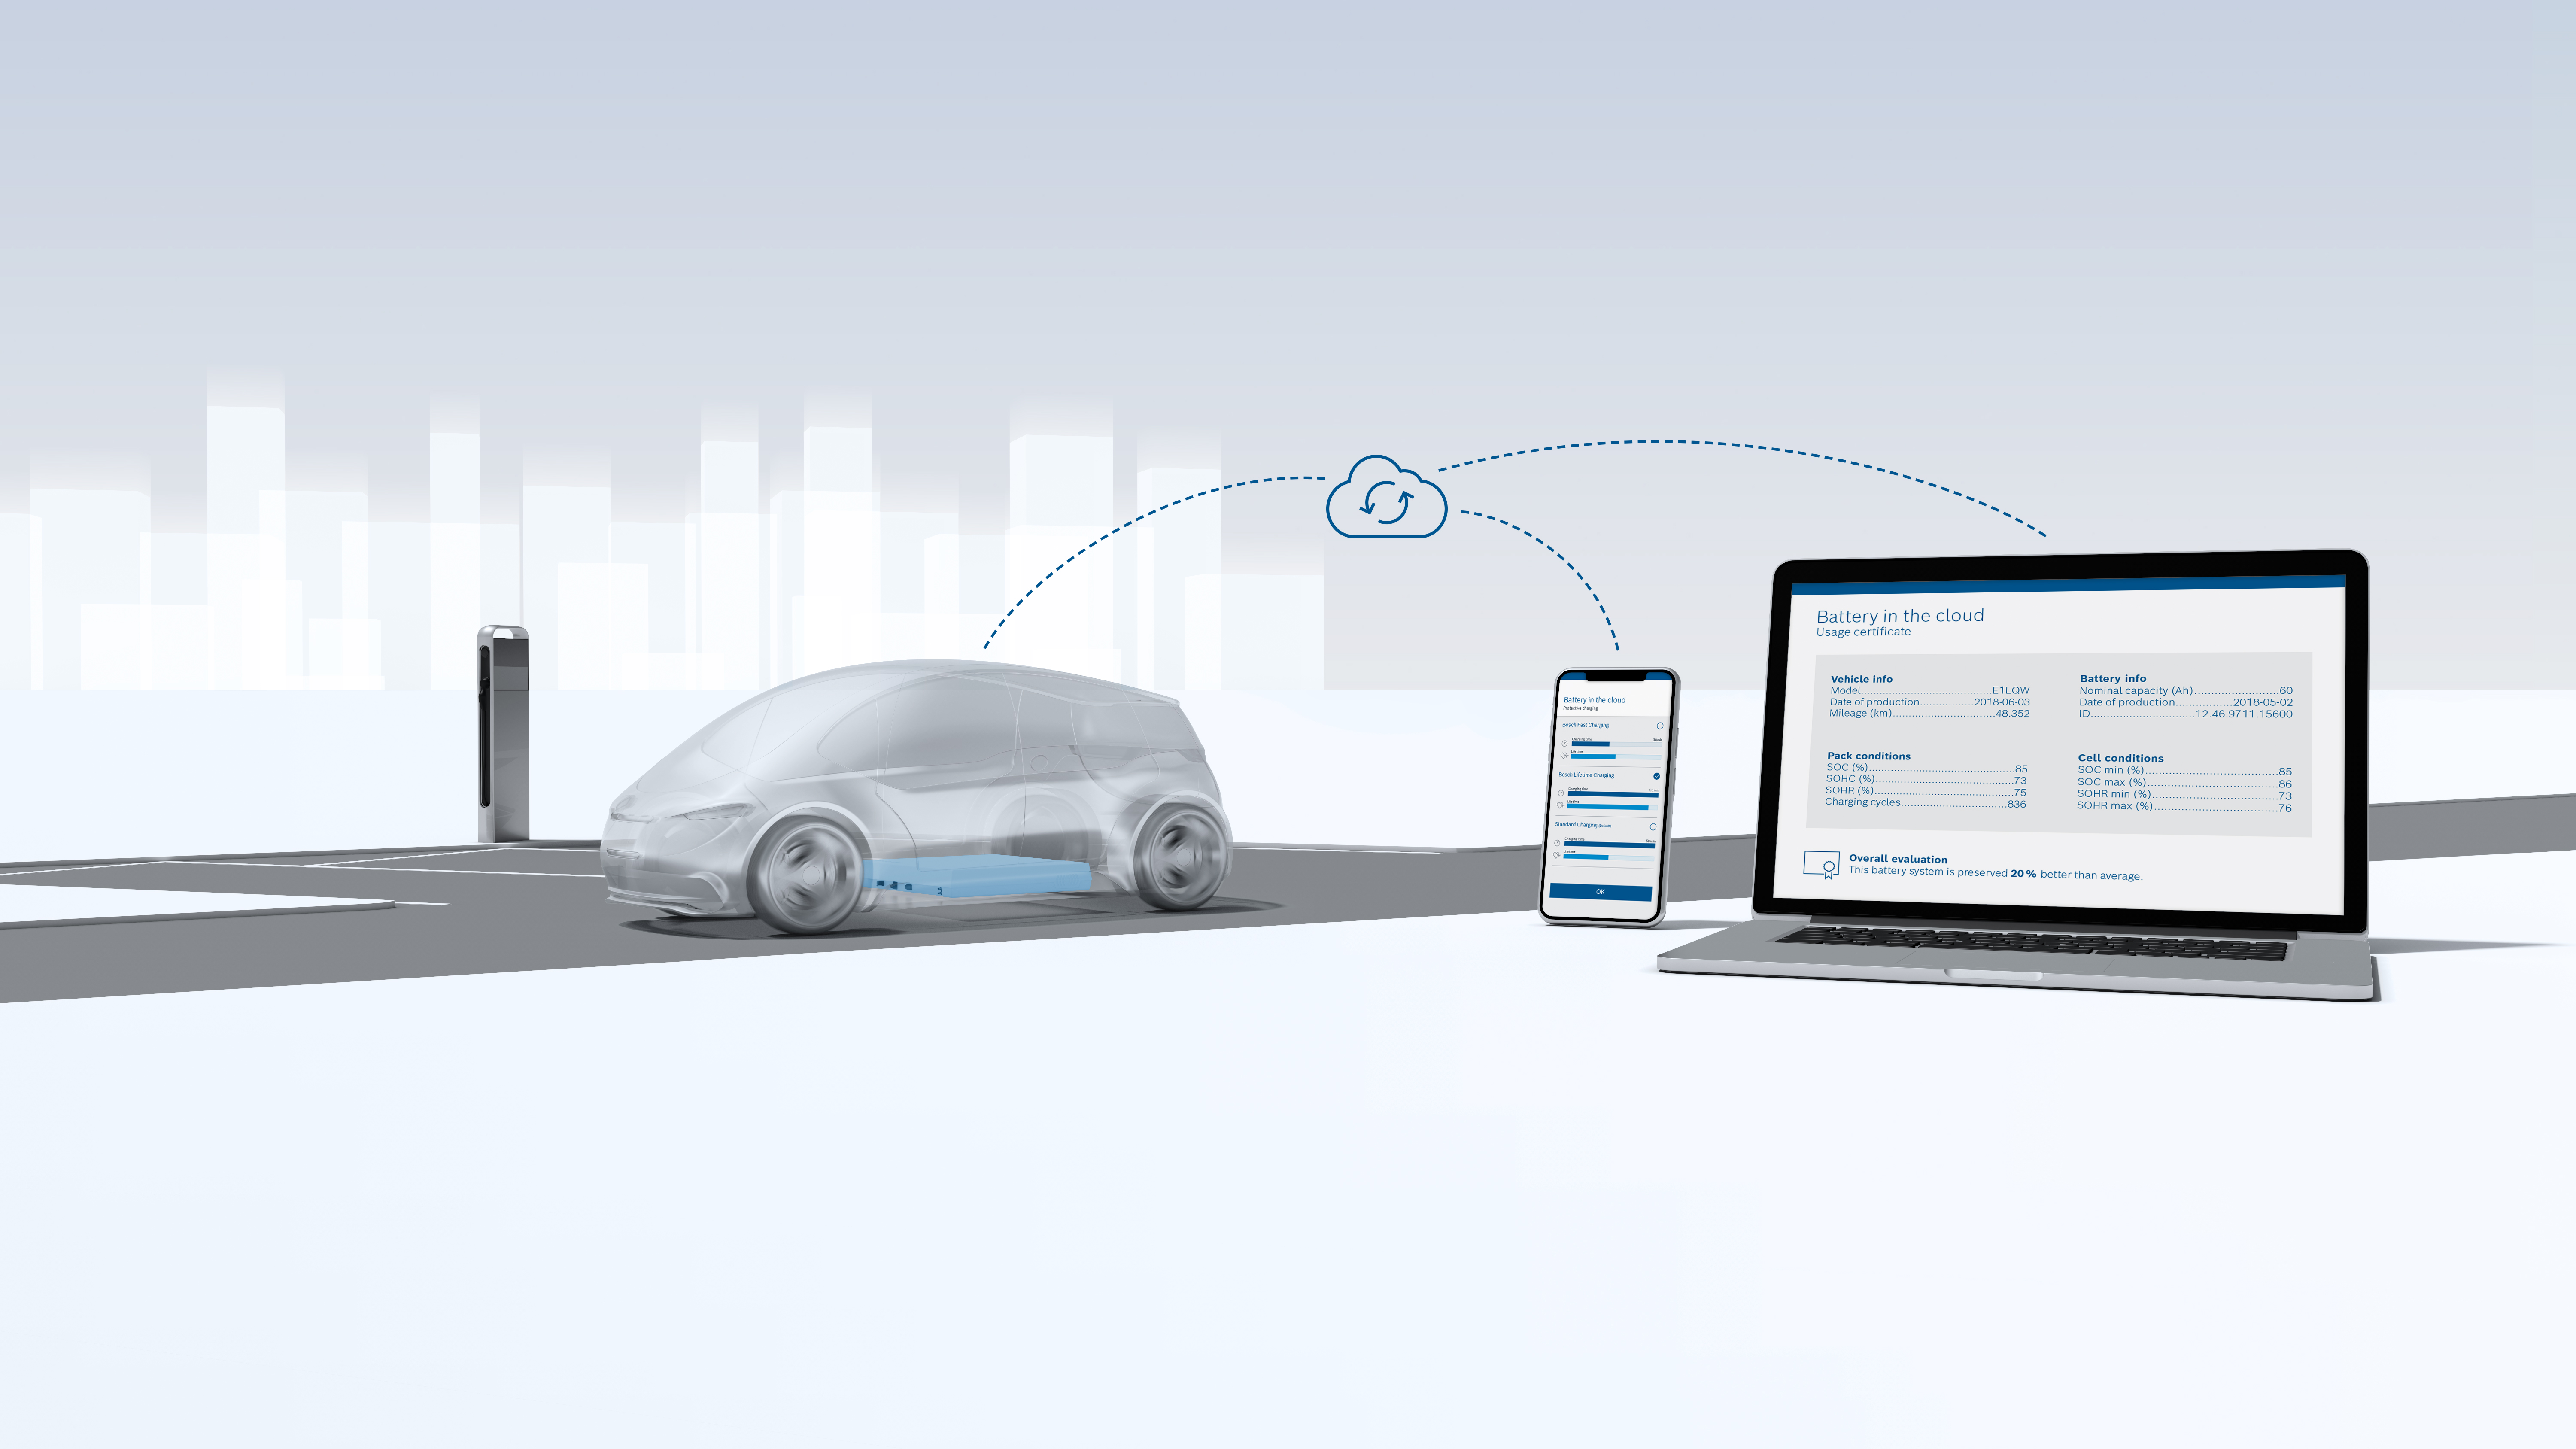 New cloud services from Bosch recognize battery stress factors and optimize the recharging process